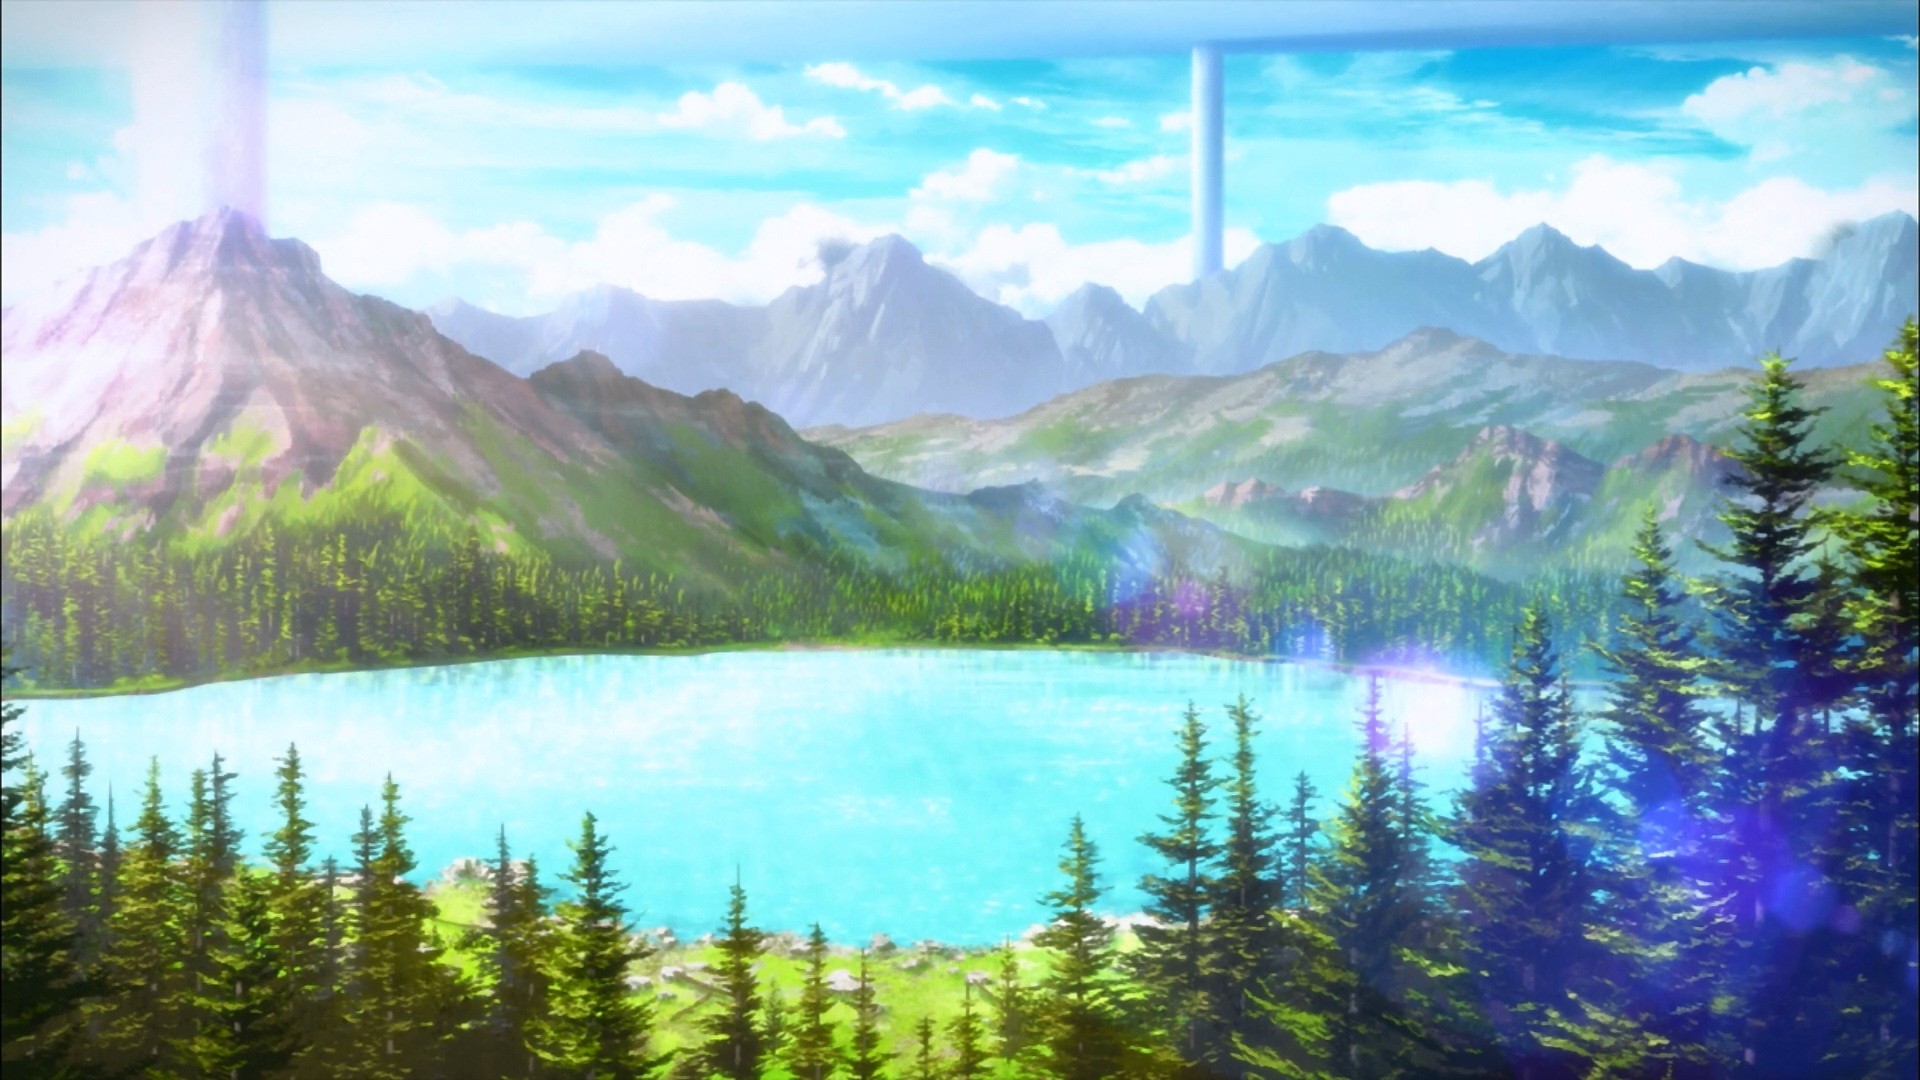 Anime Scenery wallpaper ·① Download free awesome wallpapers for desktop computers and ...